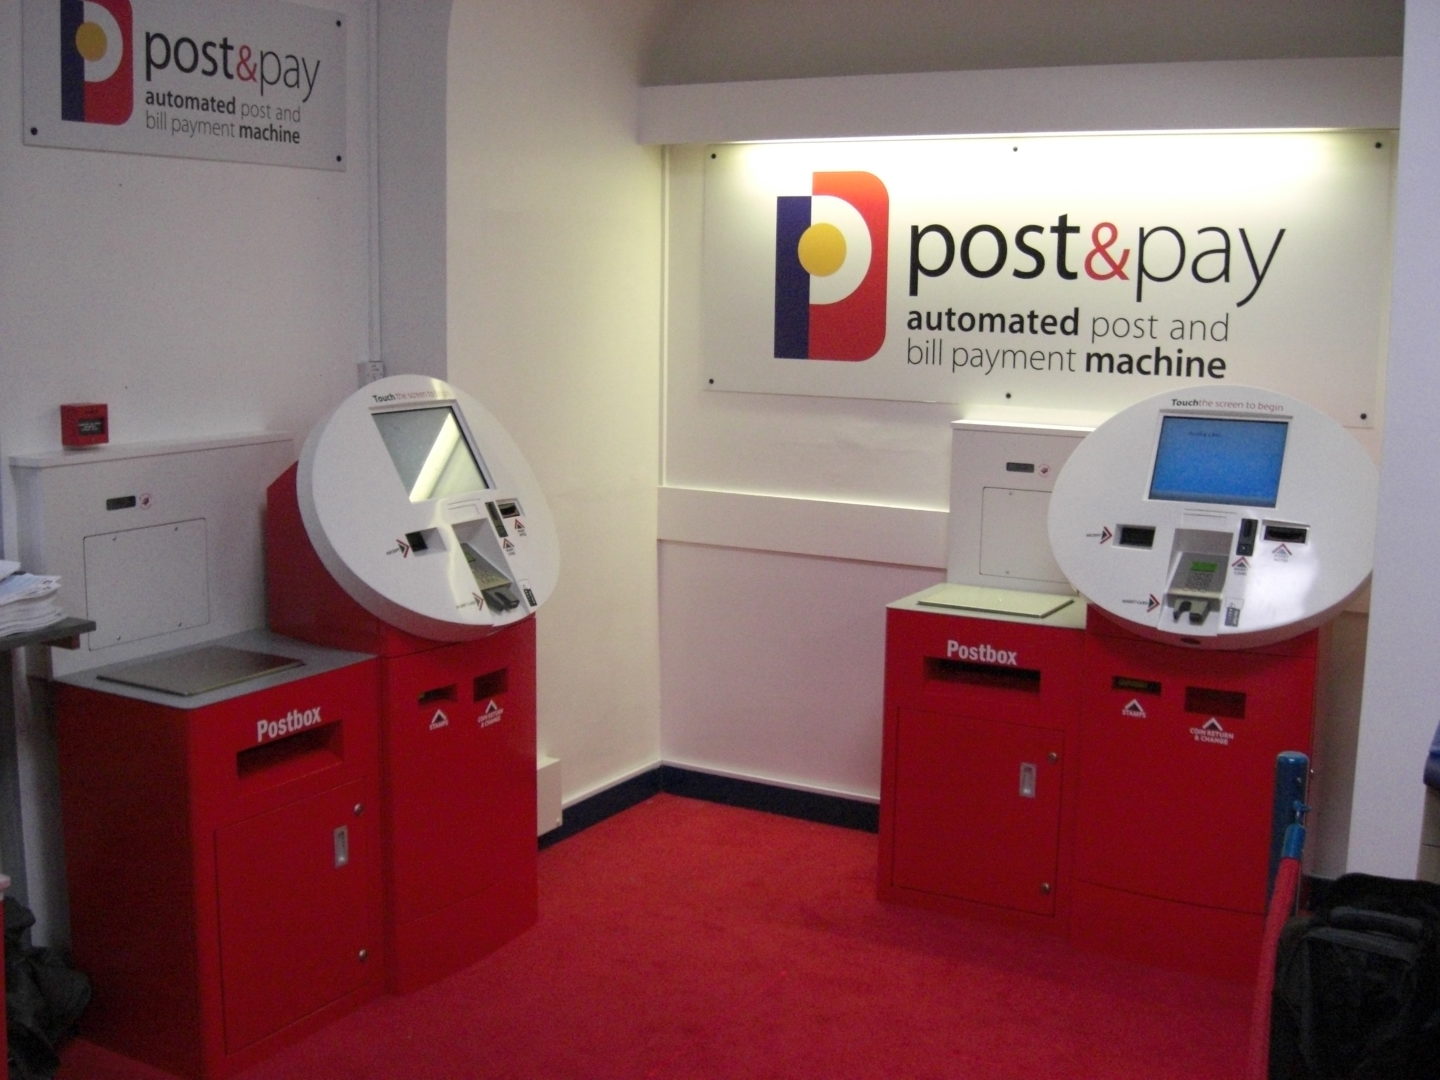 digital post kiosks with integrated postbox allowing bill payments and stamp printing designed for pick up and drop off (PUDO)